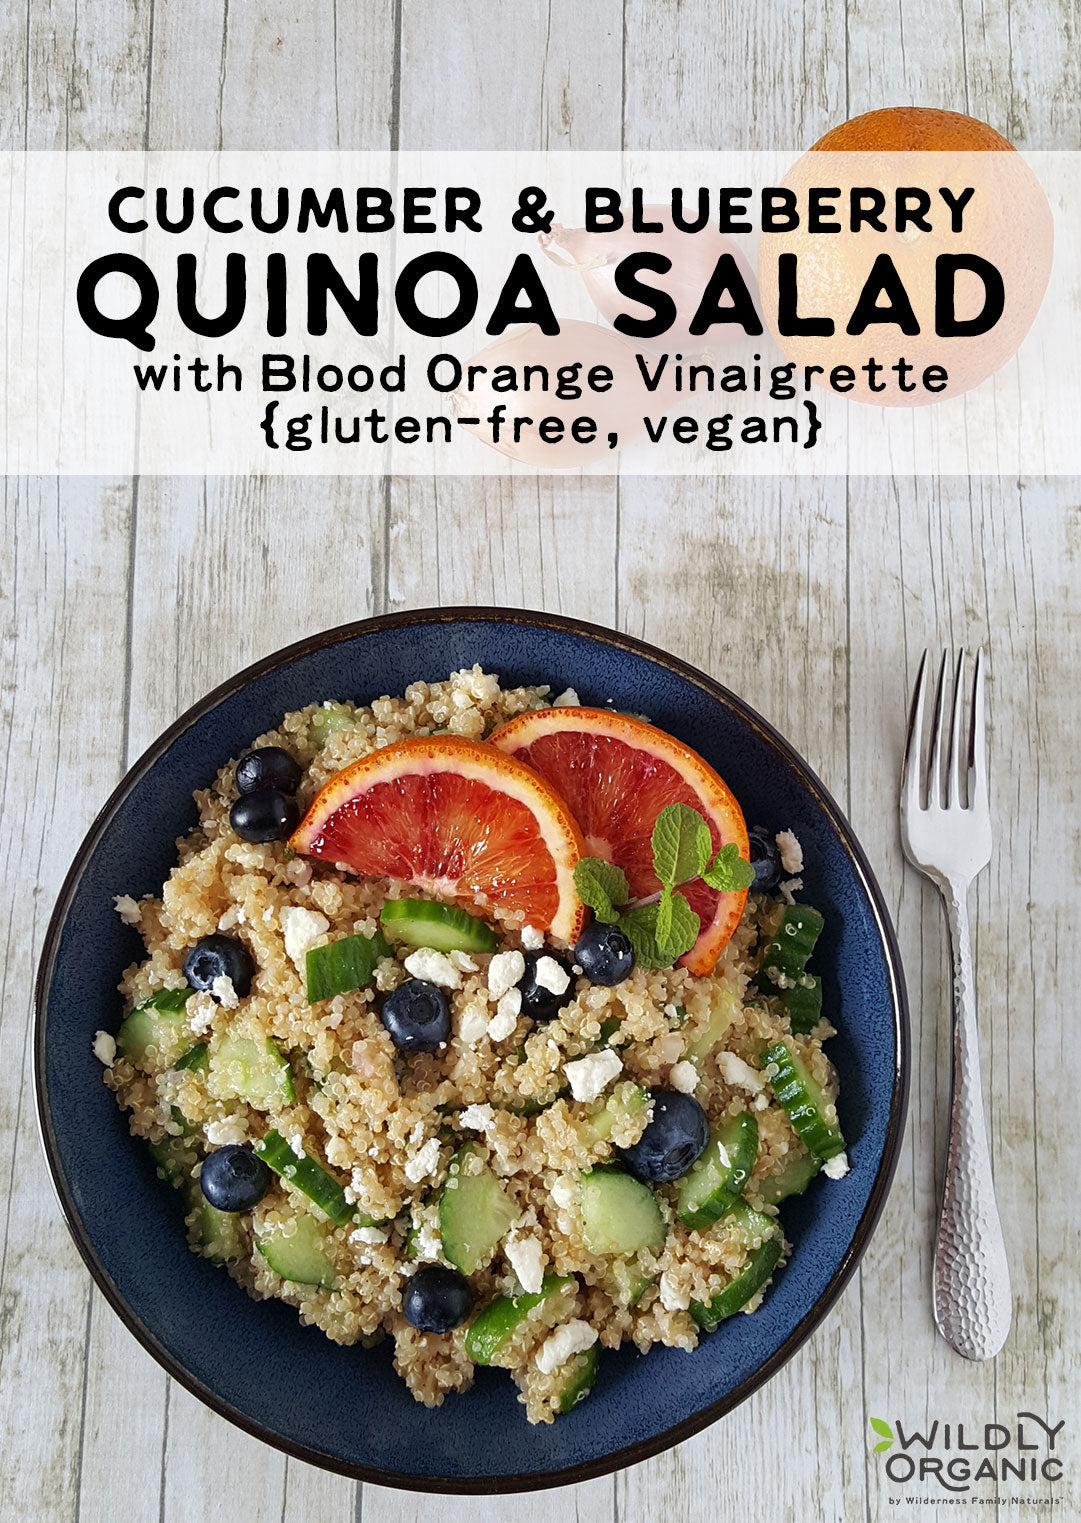 This Cucumber & Blueberry Quinoa Salad with Blood Orange Vinaigrette is light, bright, and fresh. Crunchy cucumber, salty bits of feta, a hint of mint, and pop of blueberry sweetness, surrounded by mildly nutty quinoa, are all wrapped in a refreshing blood orange vinaigrette.